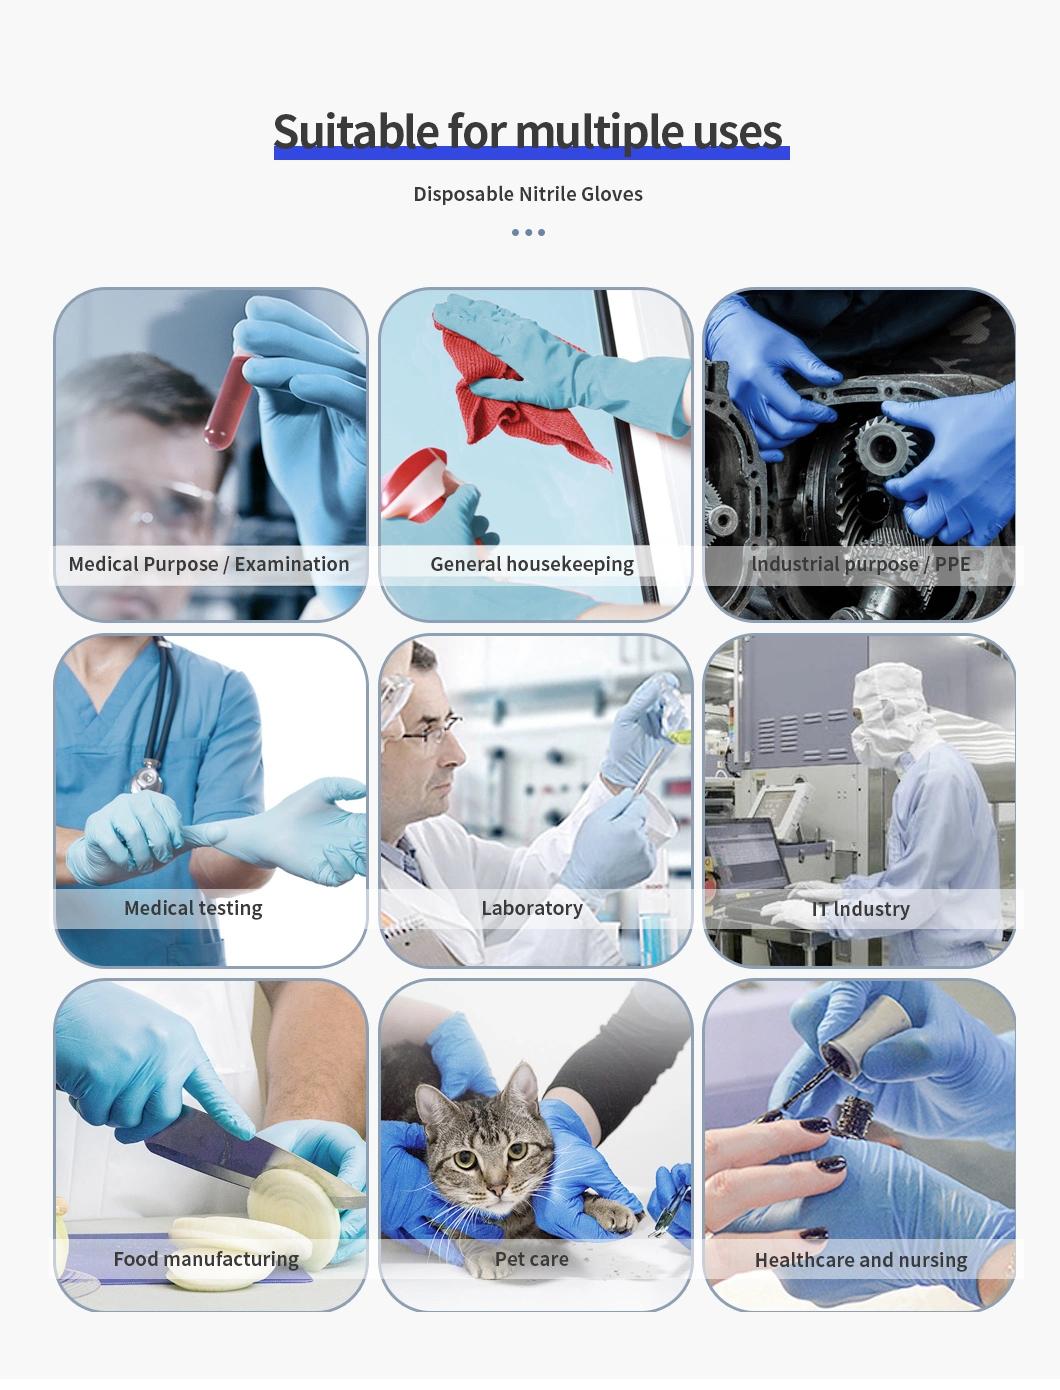 Powder-Free Material Blue Color Disposable Nitrile Gloves